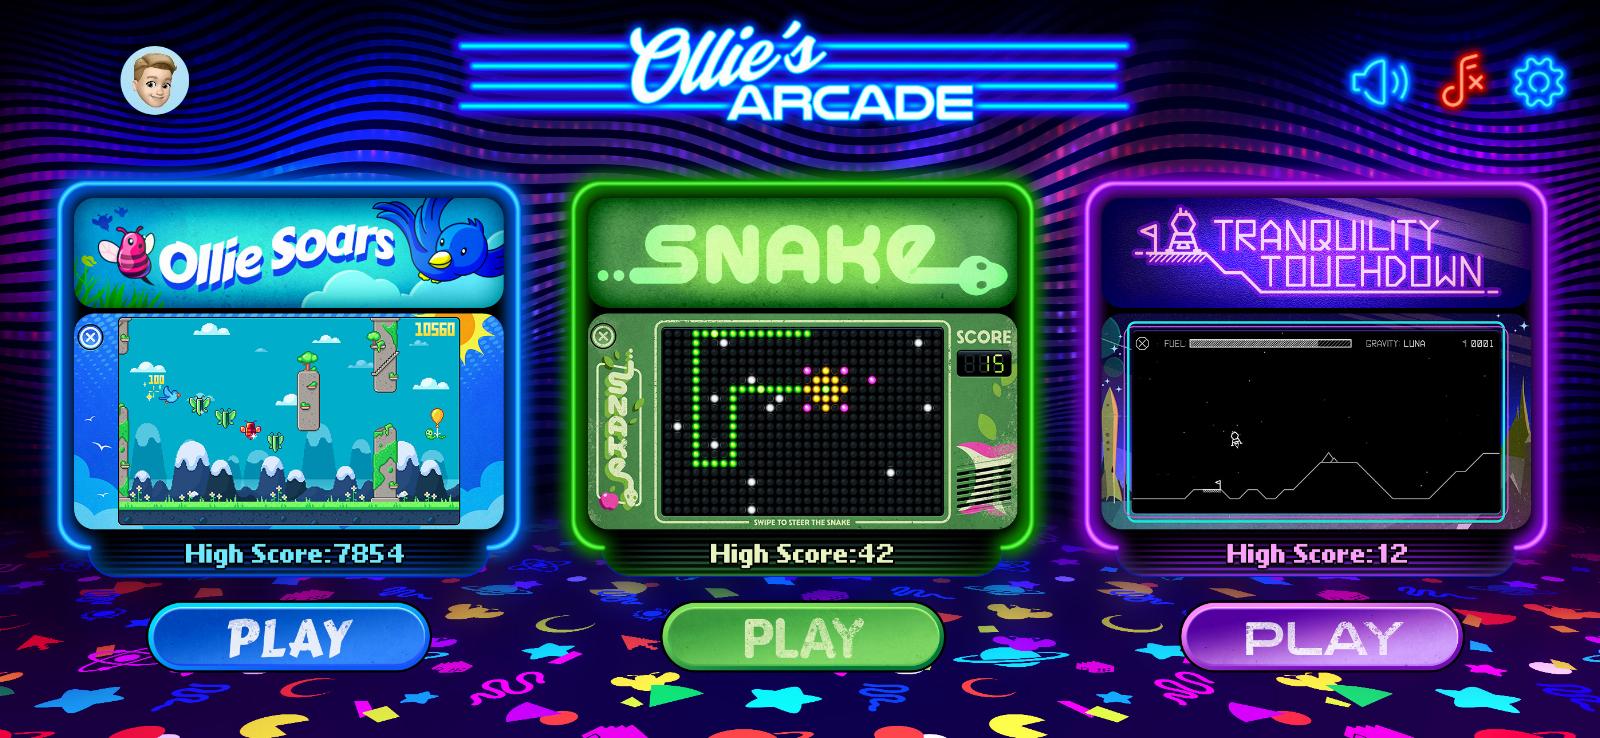 Twitterific’s Easter eggs find new life in retro-gaming app ‘Ollie’s Arcade’